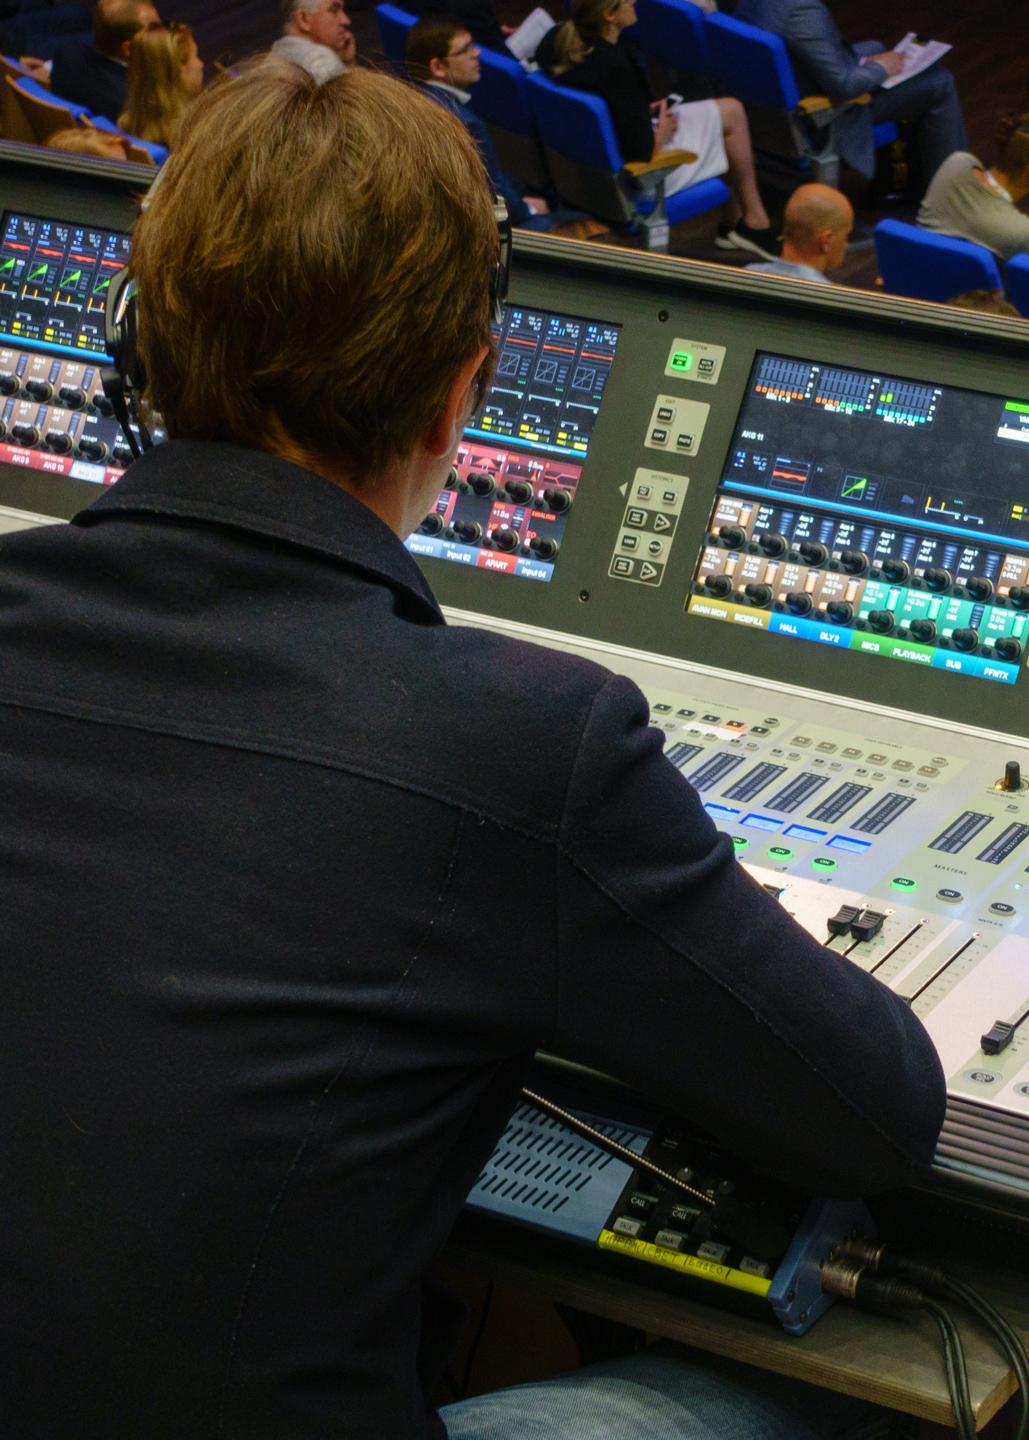 A V1 High-End Switcher from behind operating a large mixing console in a room with an audience in the background.